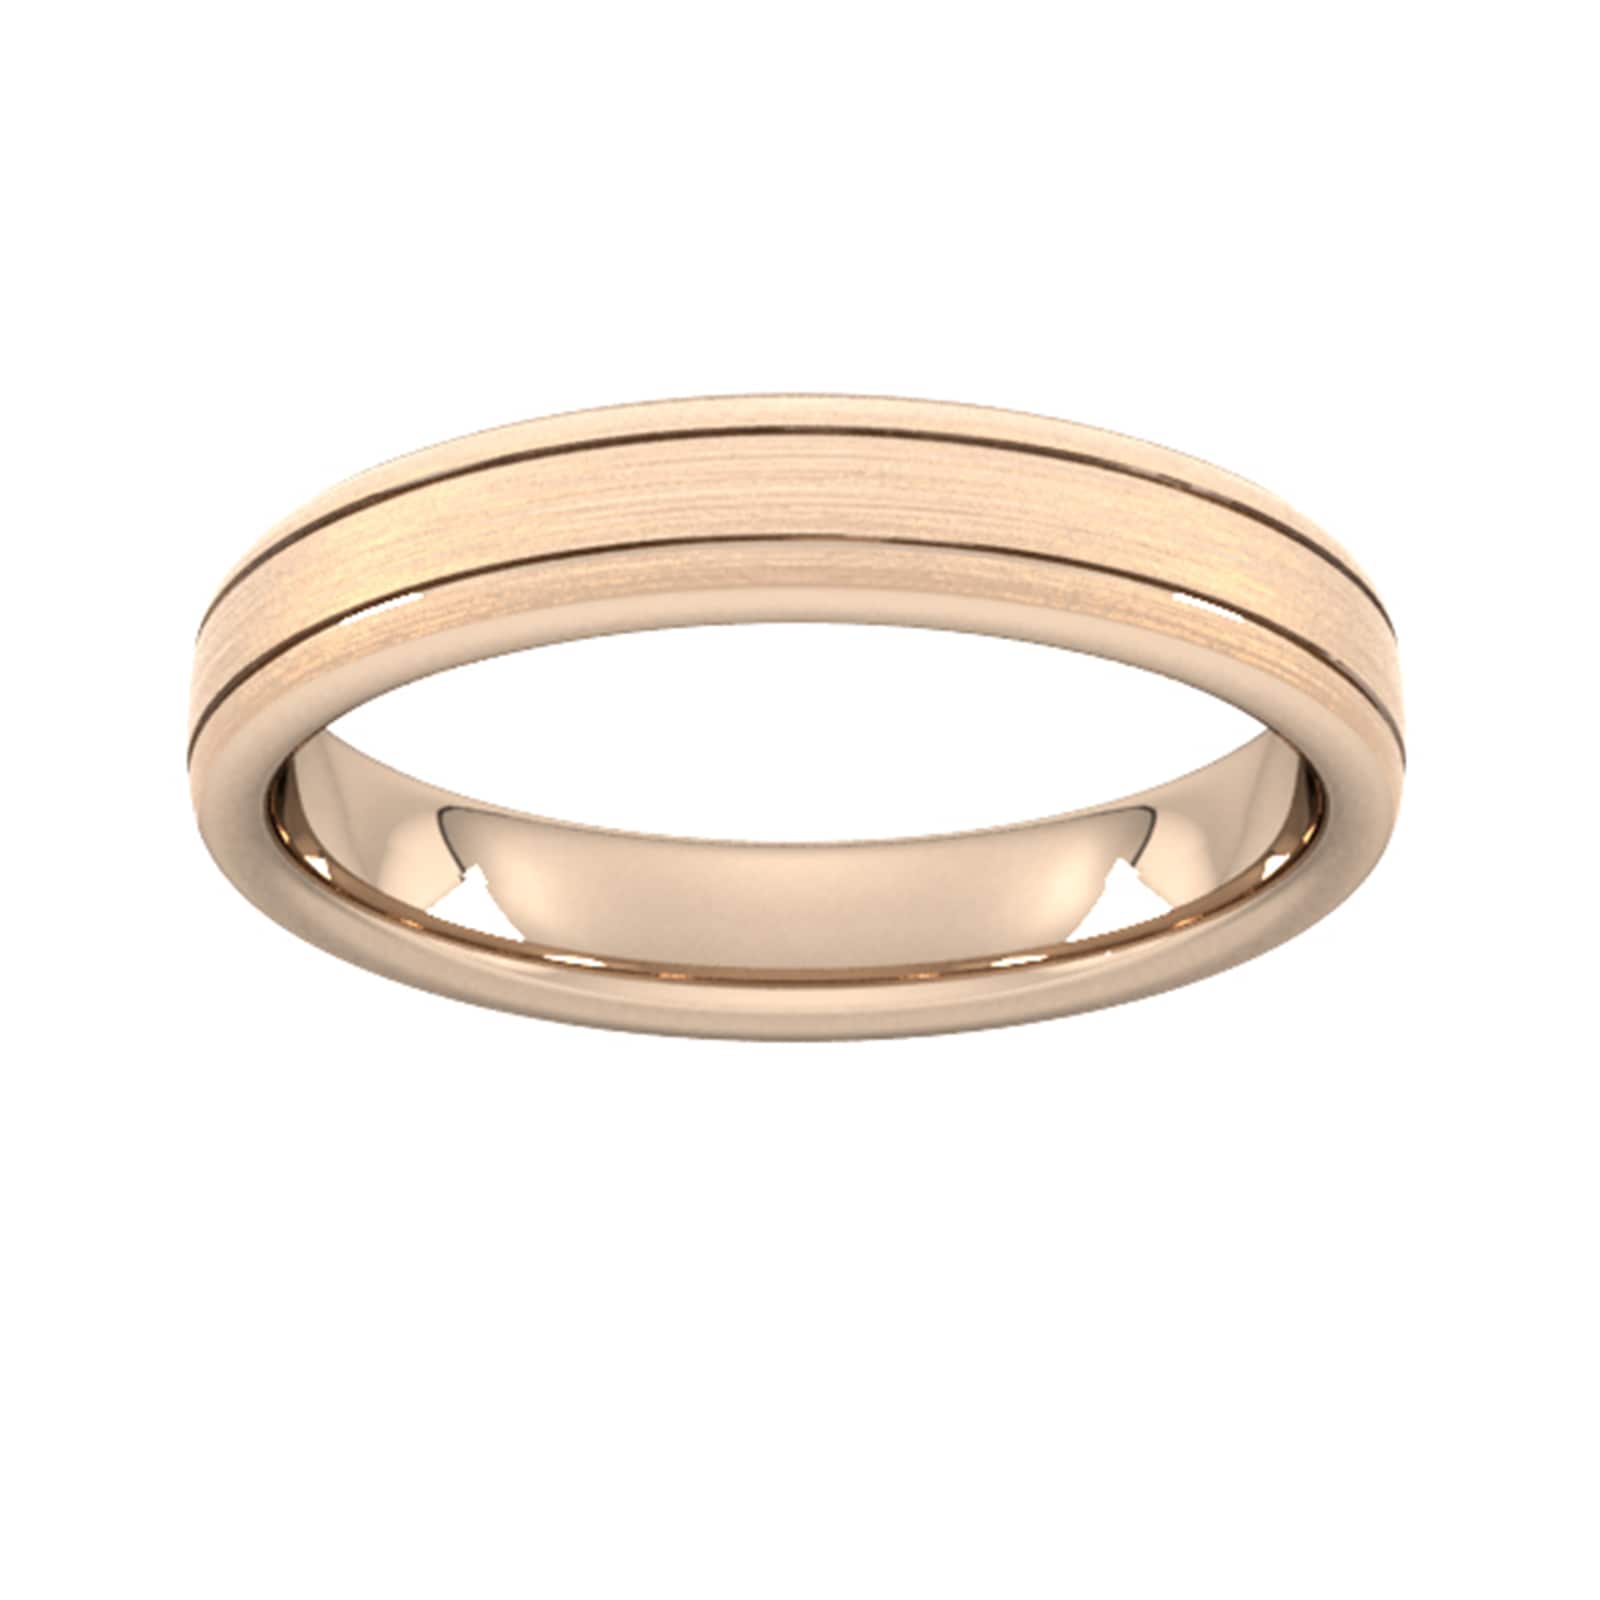 4mm Traditional Court Heavy Matt Finish With Double Grooves Wedding Ring In 9 Carat Rose Gold - Ring Size T